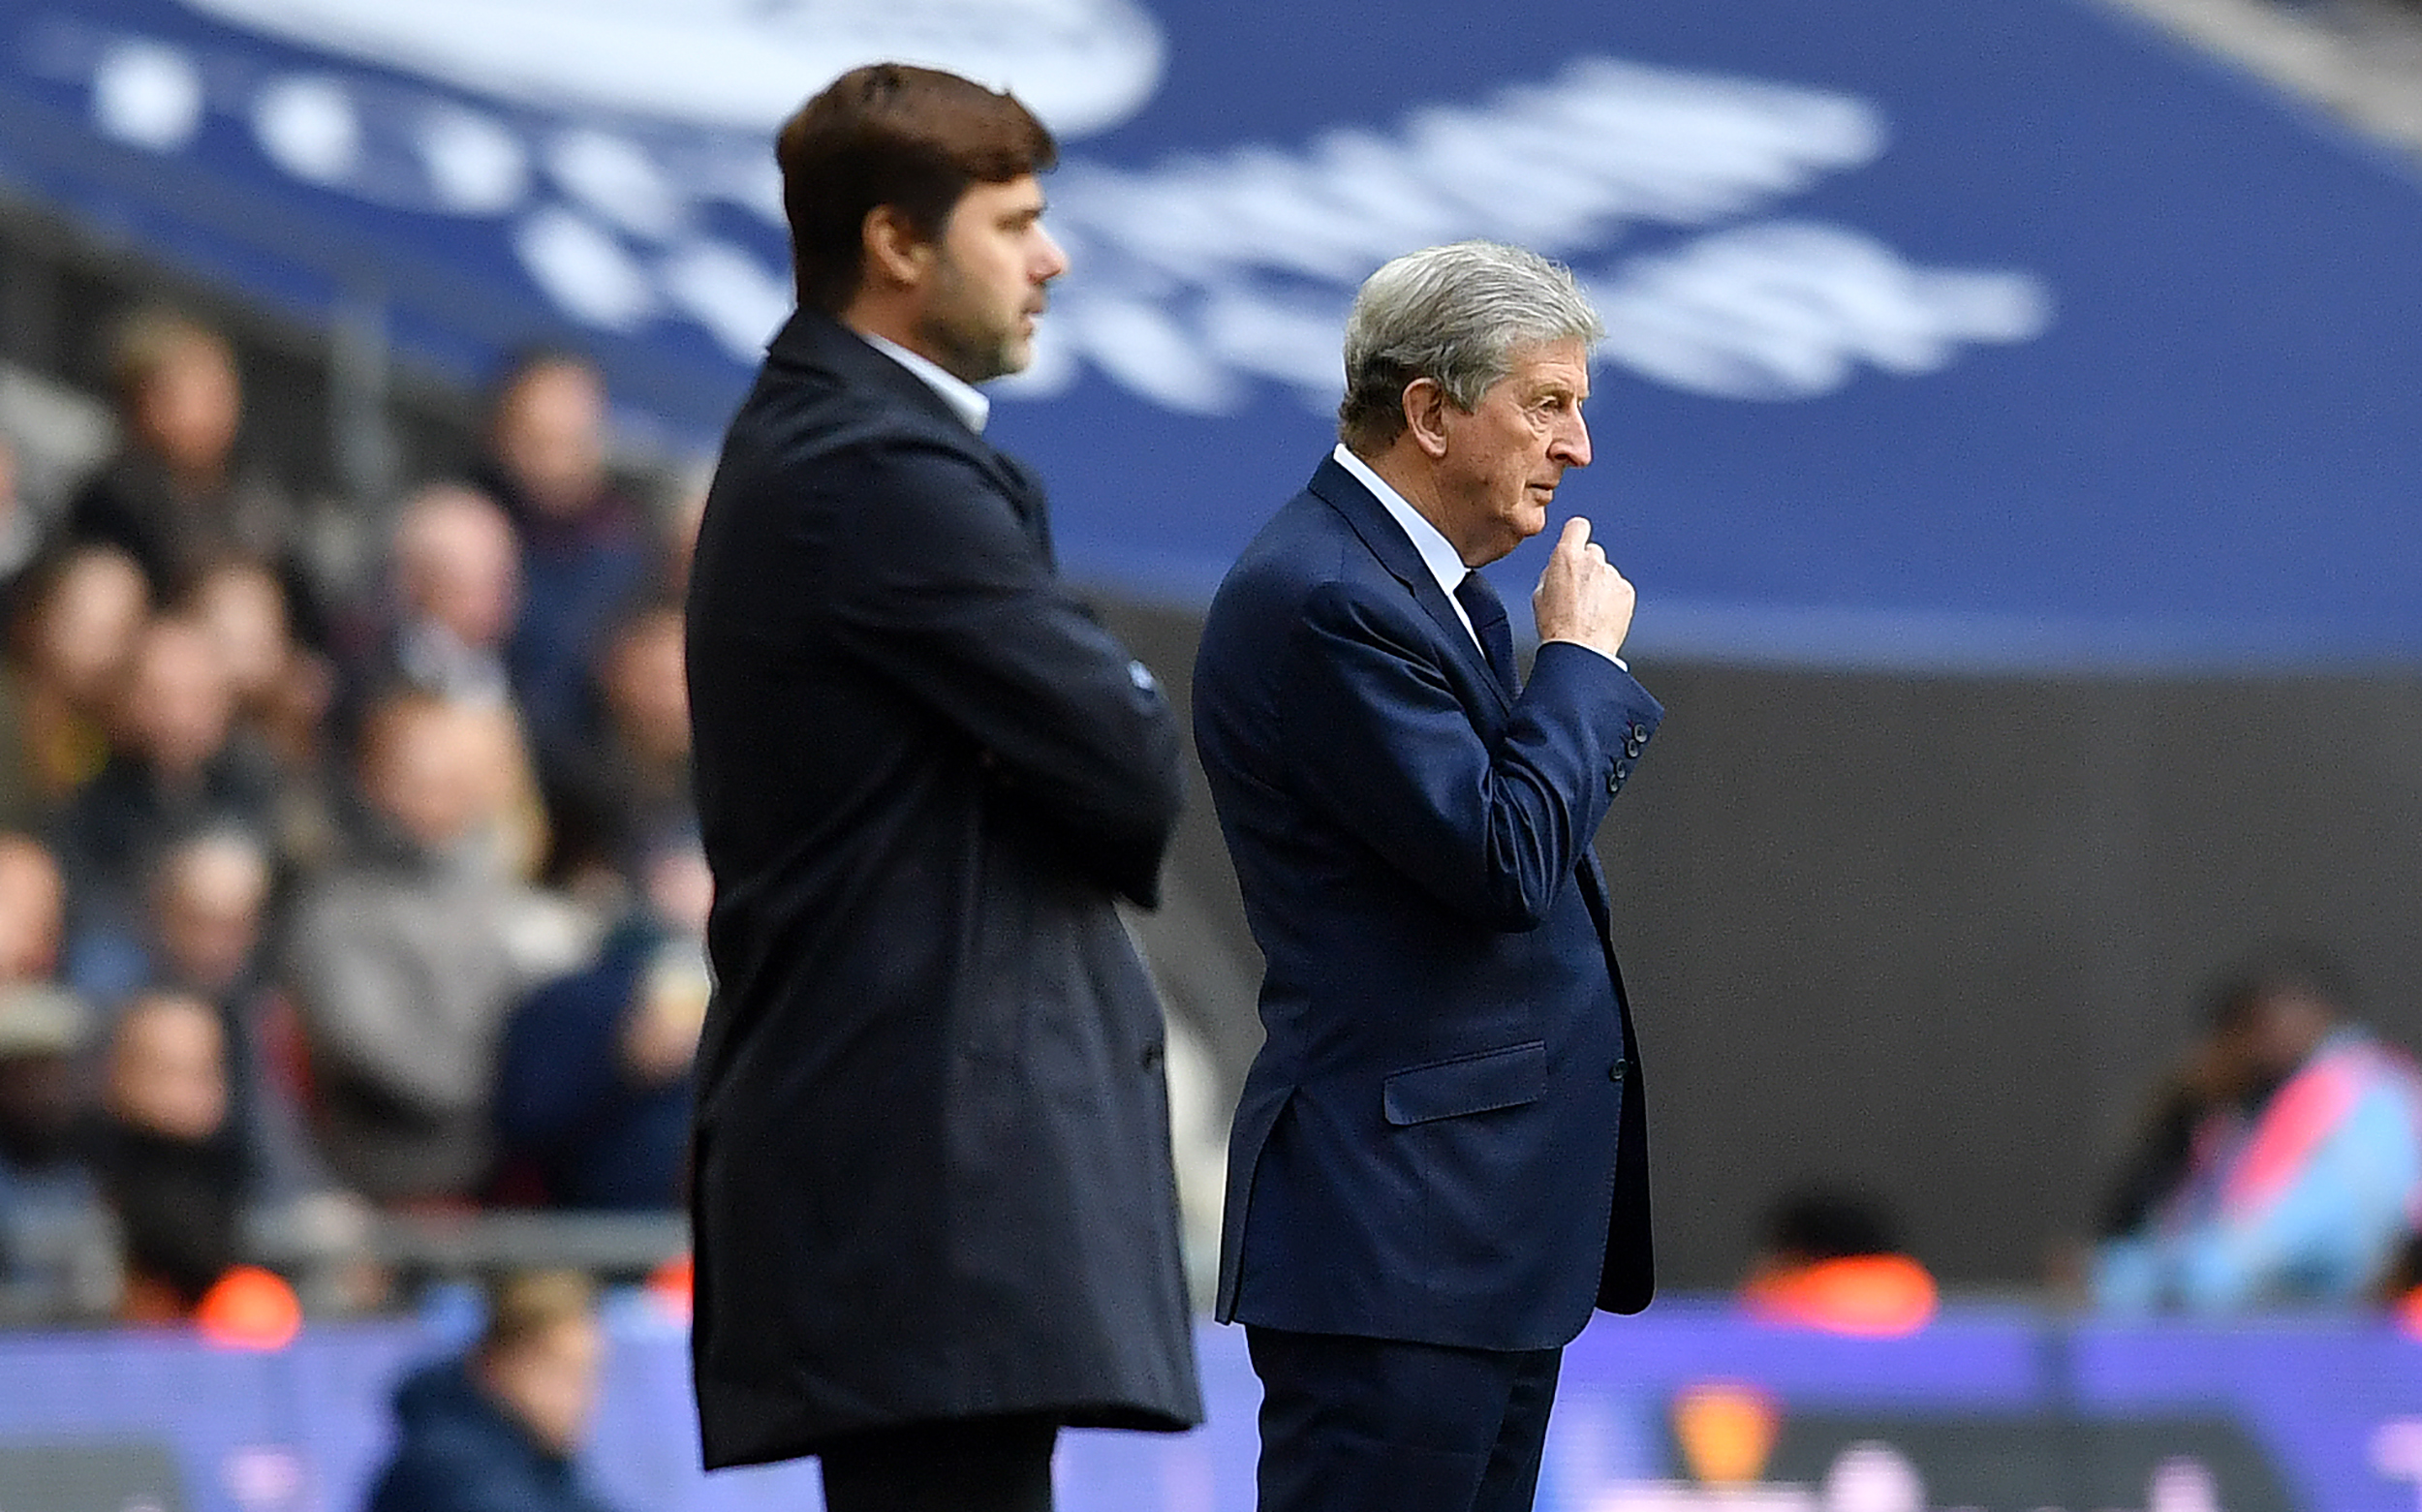 Tottenham Hotspur's Argentinian head coach Mauricio Pochettino and Crystal Palace's English manager Roy Hodgson watches his players from the touchline during the English Premier League football match between Tottenham Hotspur and Crystal Palace at Wembley Stadium in London, on November 5, 2017. / AFP PHOTO / Ben STANSALL / RESTRICTED TO EDITORIAL USE. No use with unauthorized audio, video, data, fixture lists, club/league logos or 'live' services. Online in-match use limited to 75 images, no video emulation. No use in betting, games or single club/league/player publications.  /         (Photo credit should read BEN STANSALL/AFP/Getty Images)